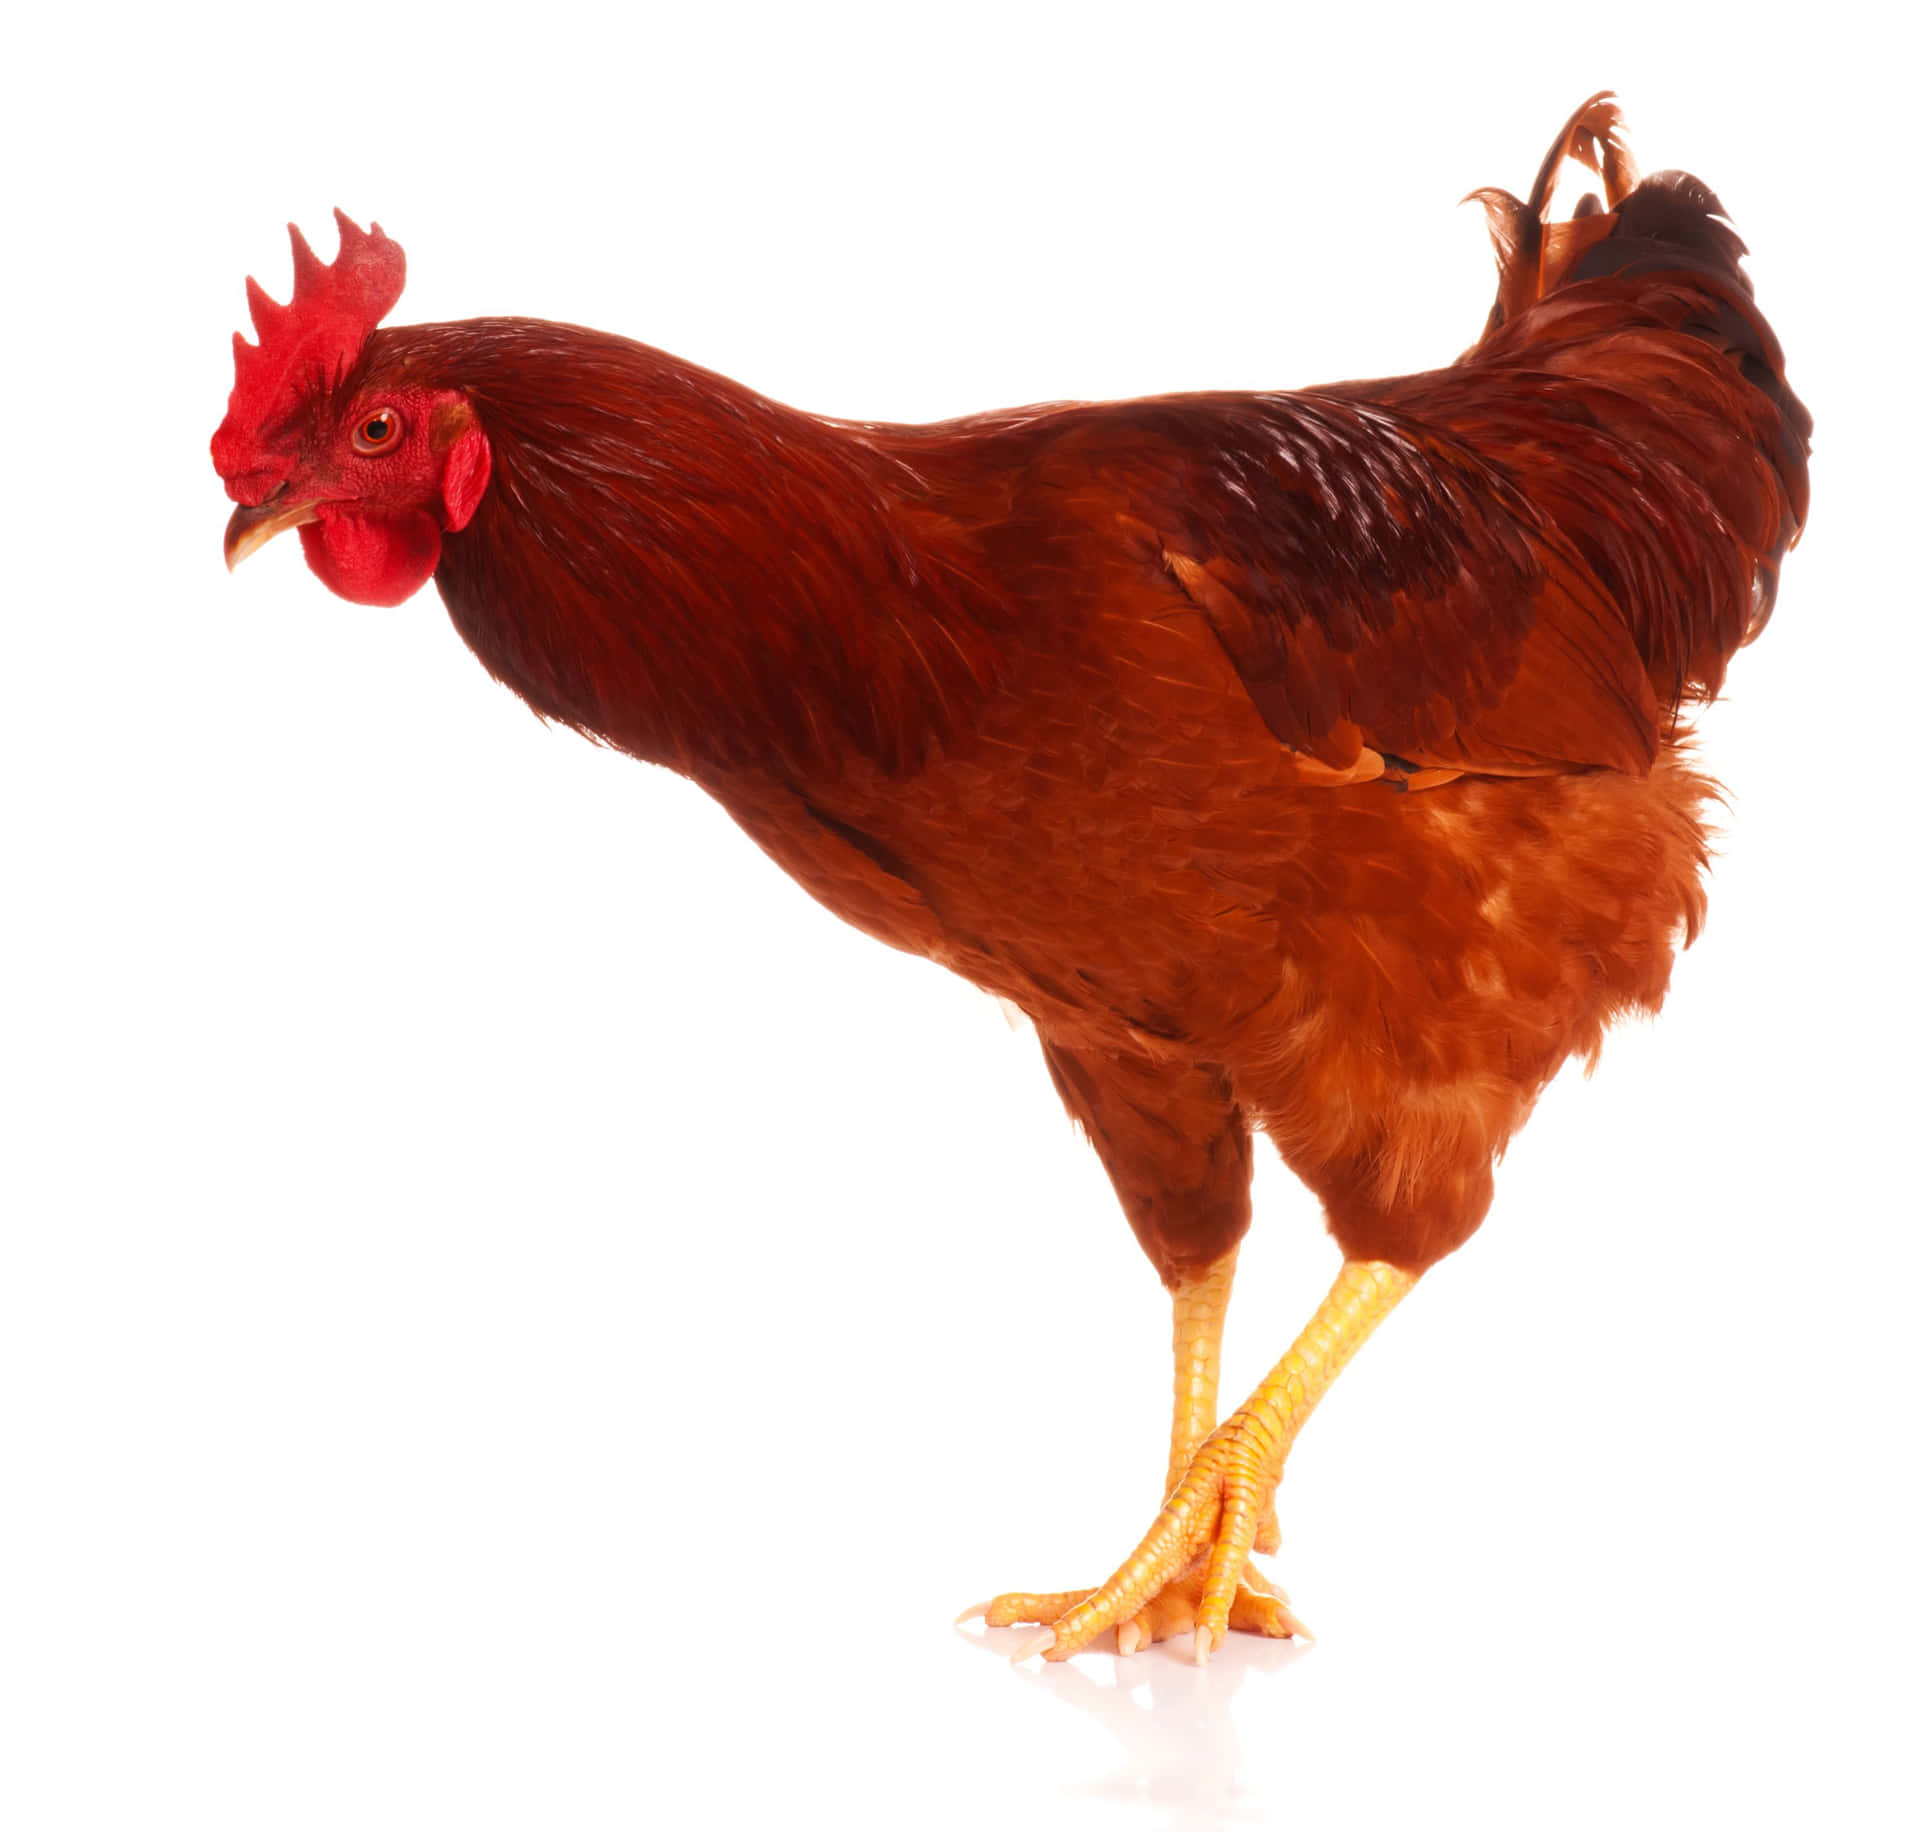 A Rooster Standing On A White Background